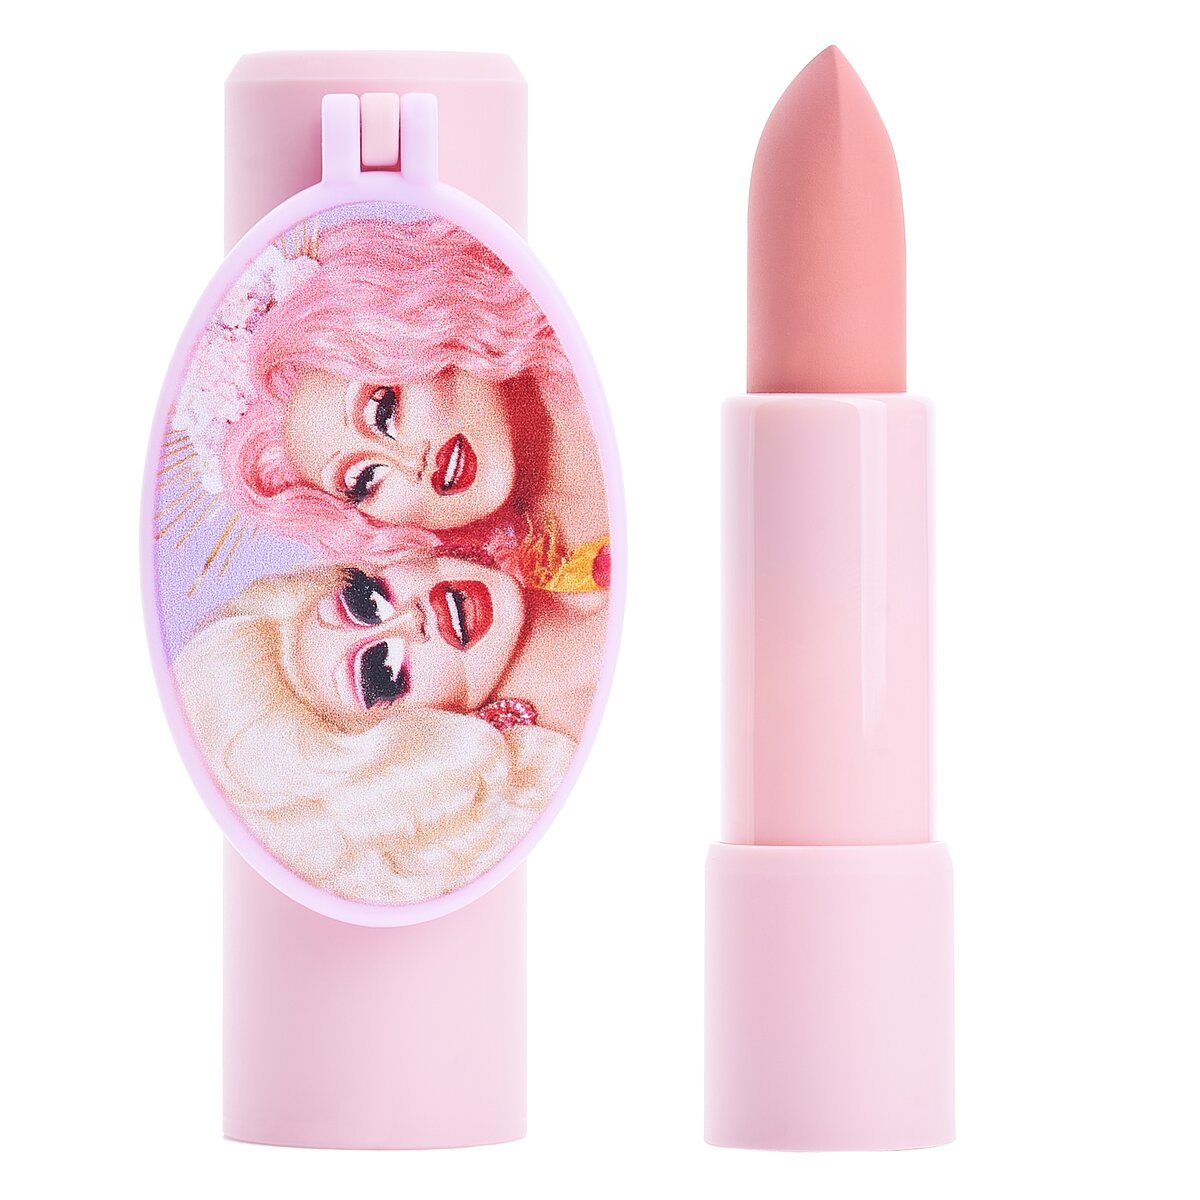 BFF4EVR LOLIPS LIPSTICK - OUTLET KIMCHI CHIC X TRIXIE MATTEL